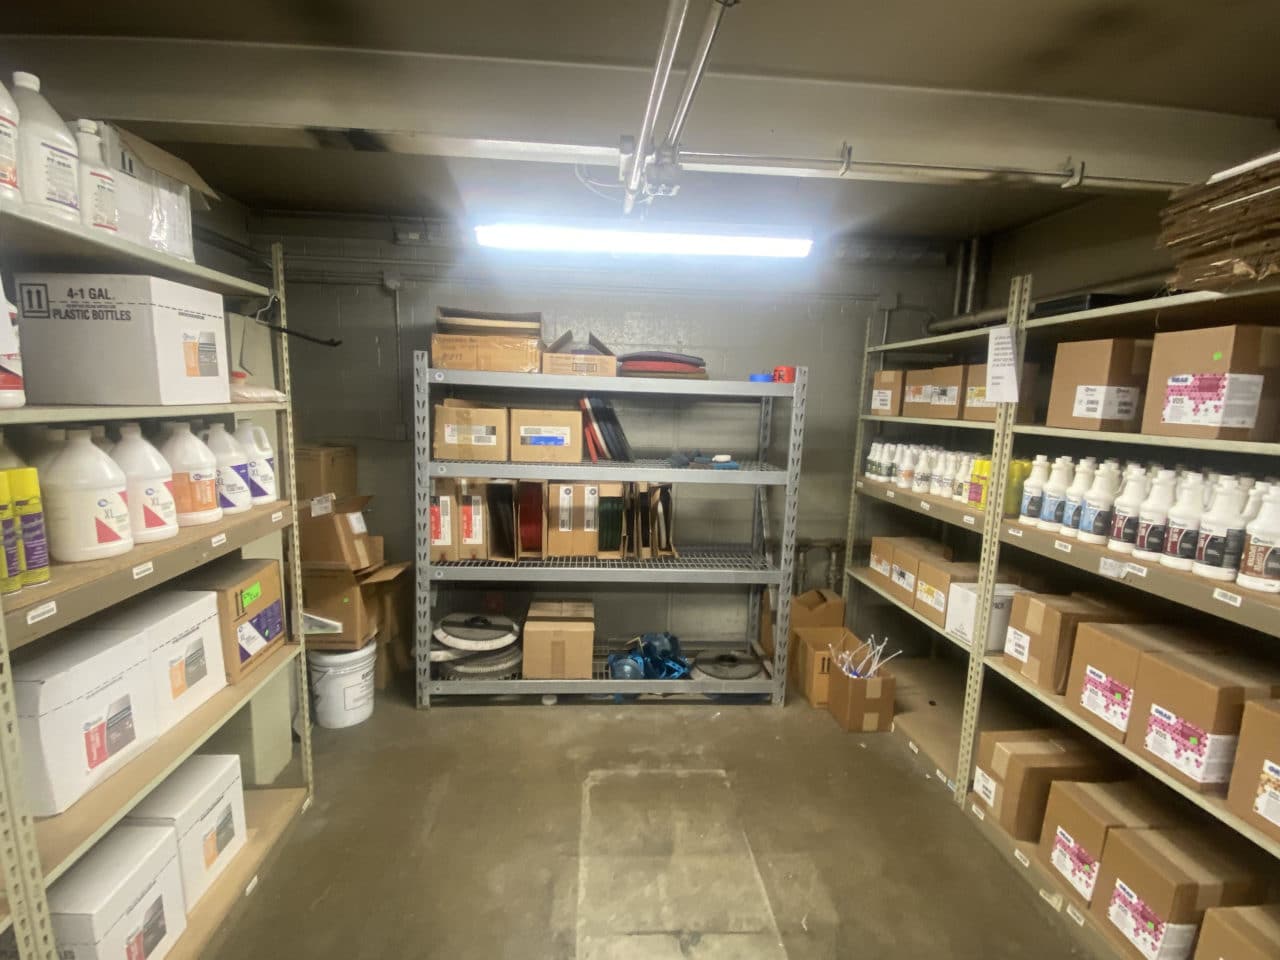 Commercial Floor Care Consumables Inventory Management